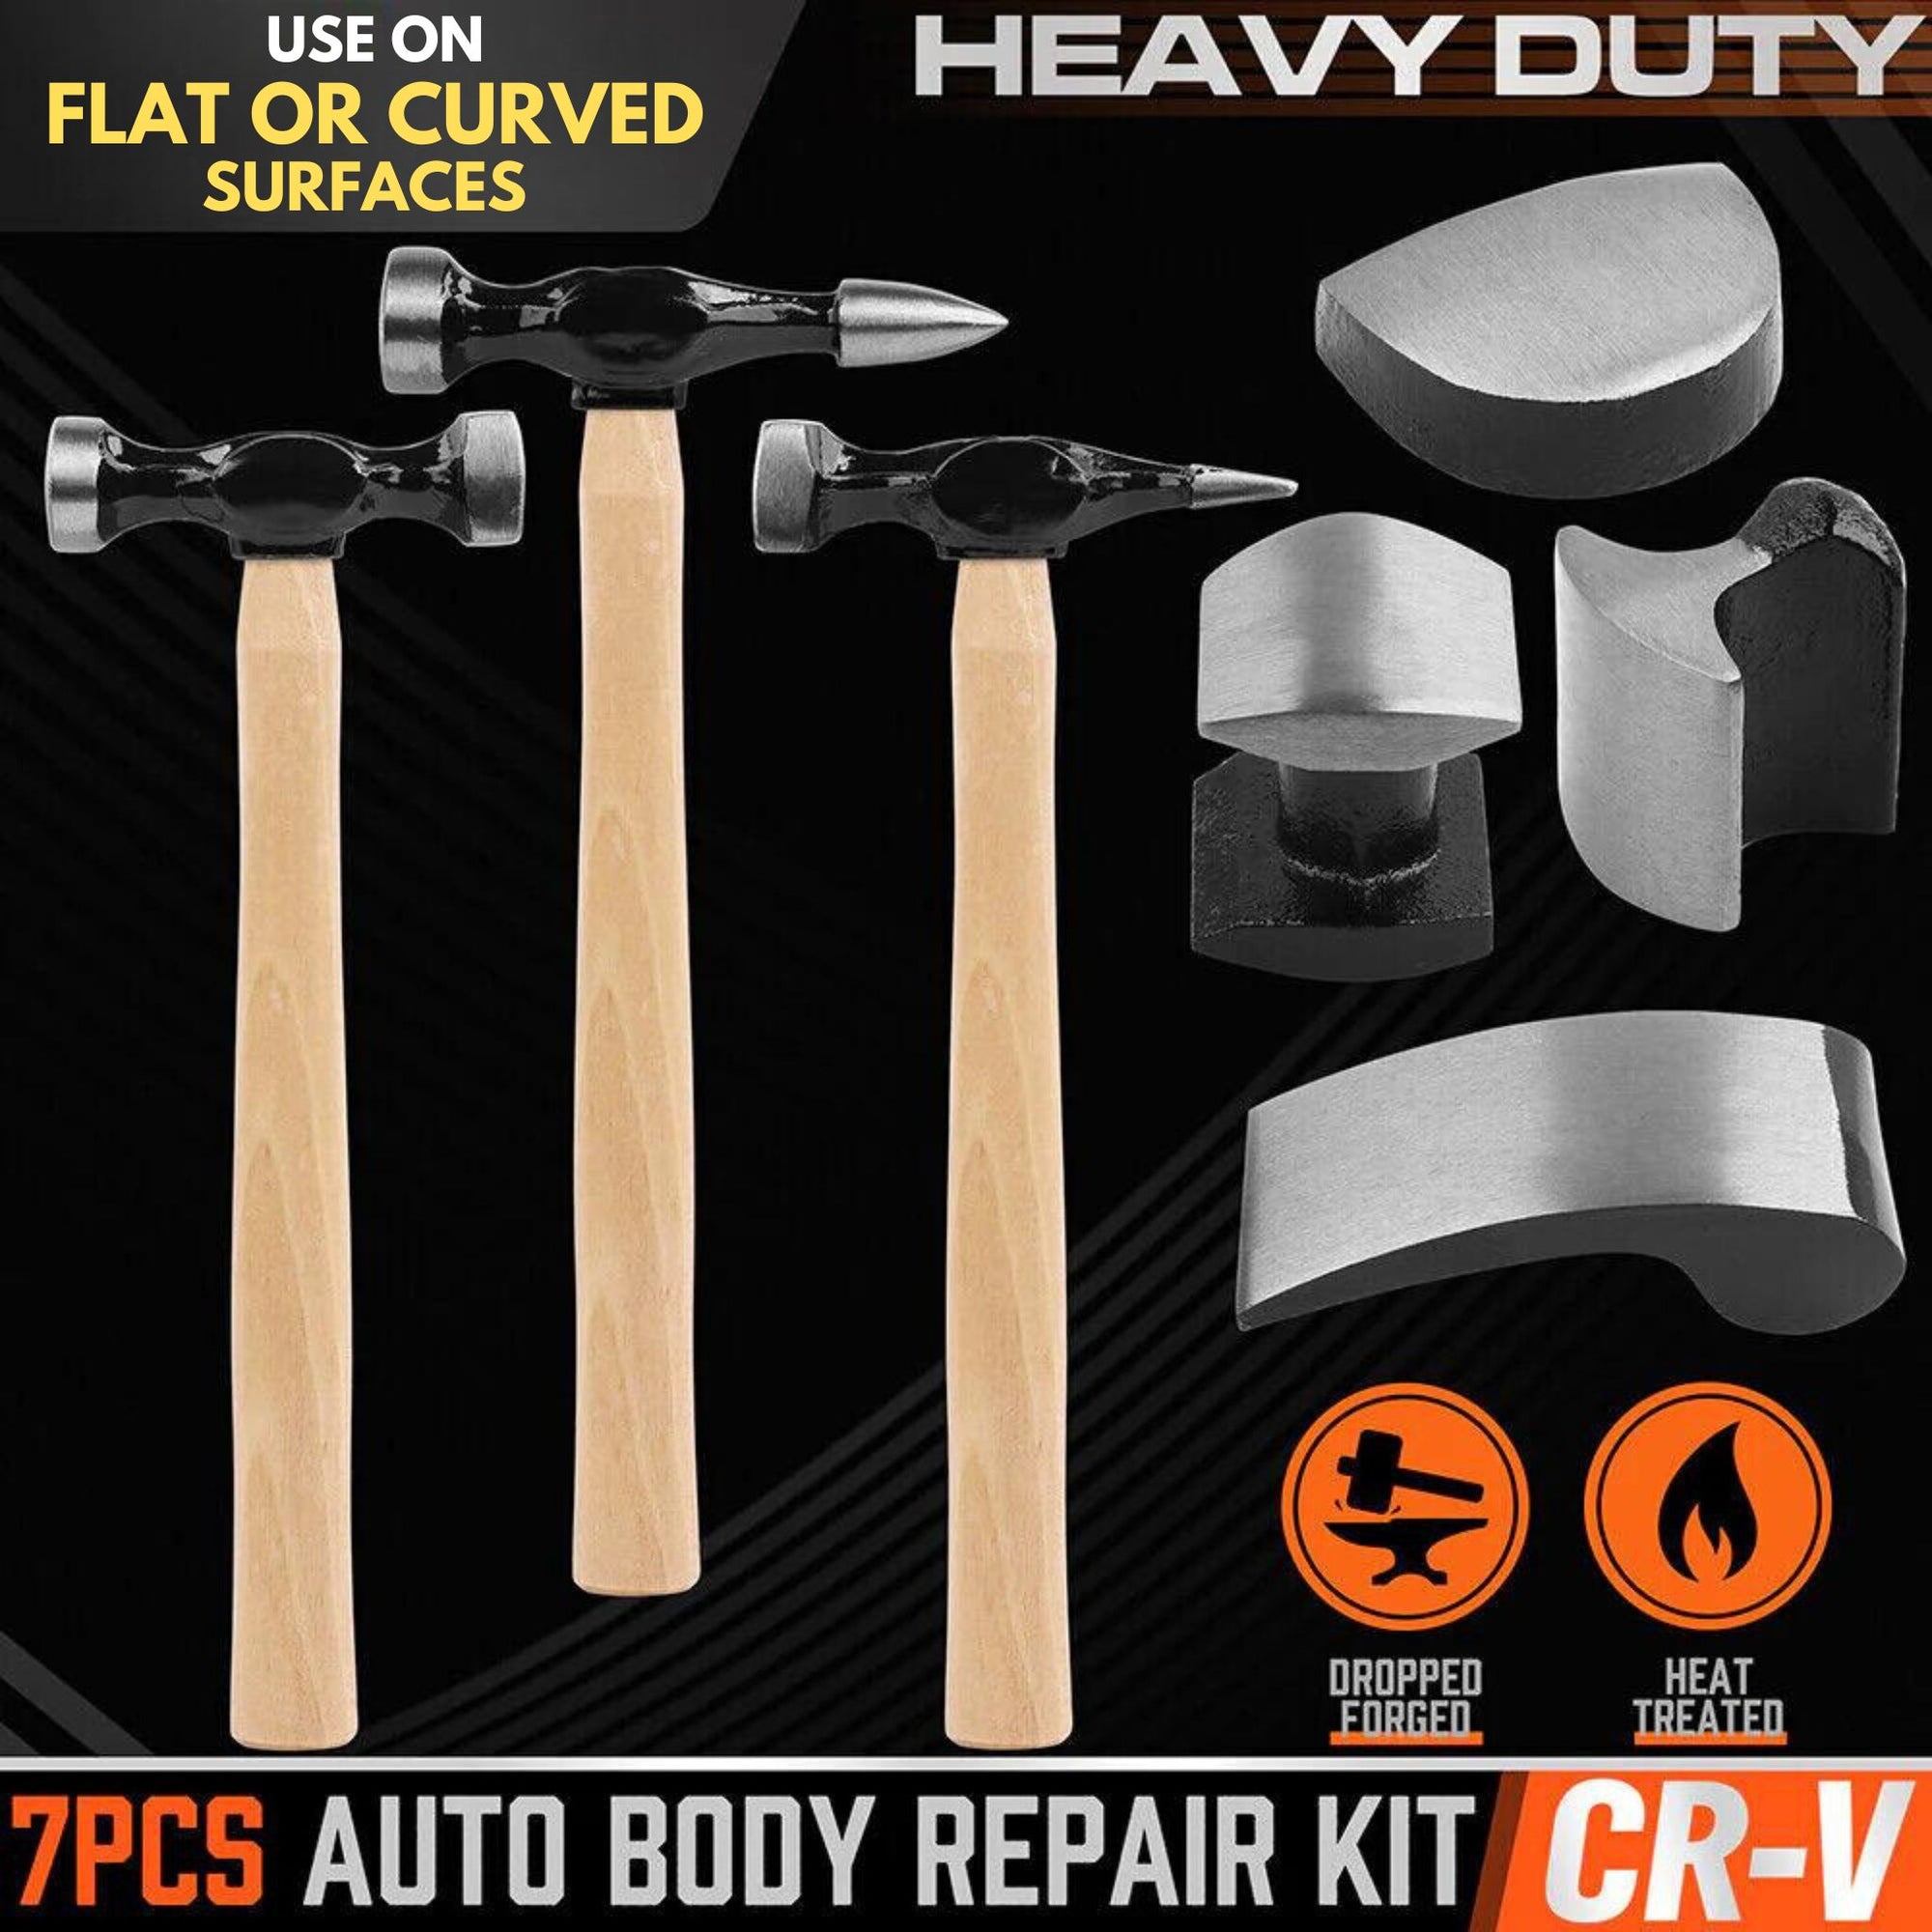 Auto Body Repair Kit - South East Clearance Centre